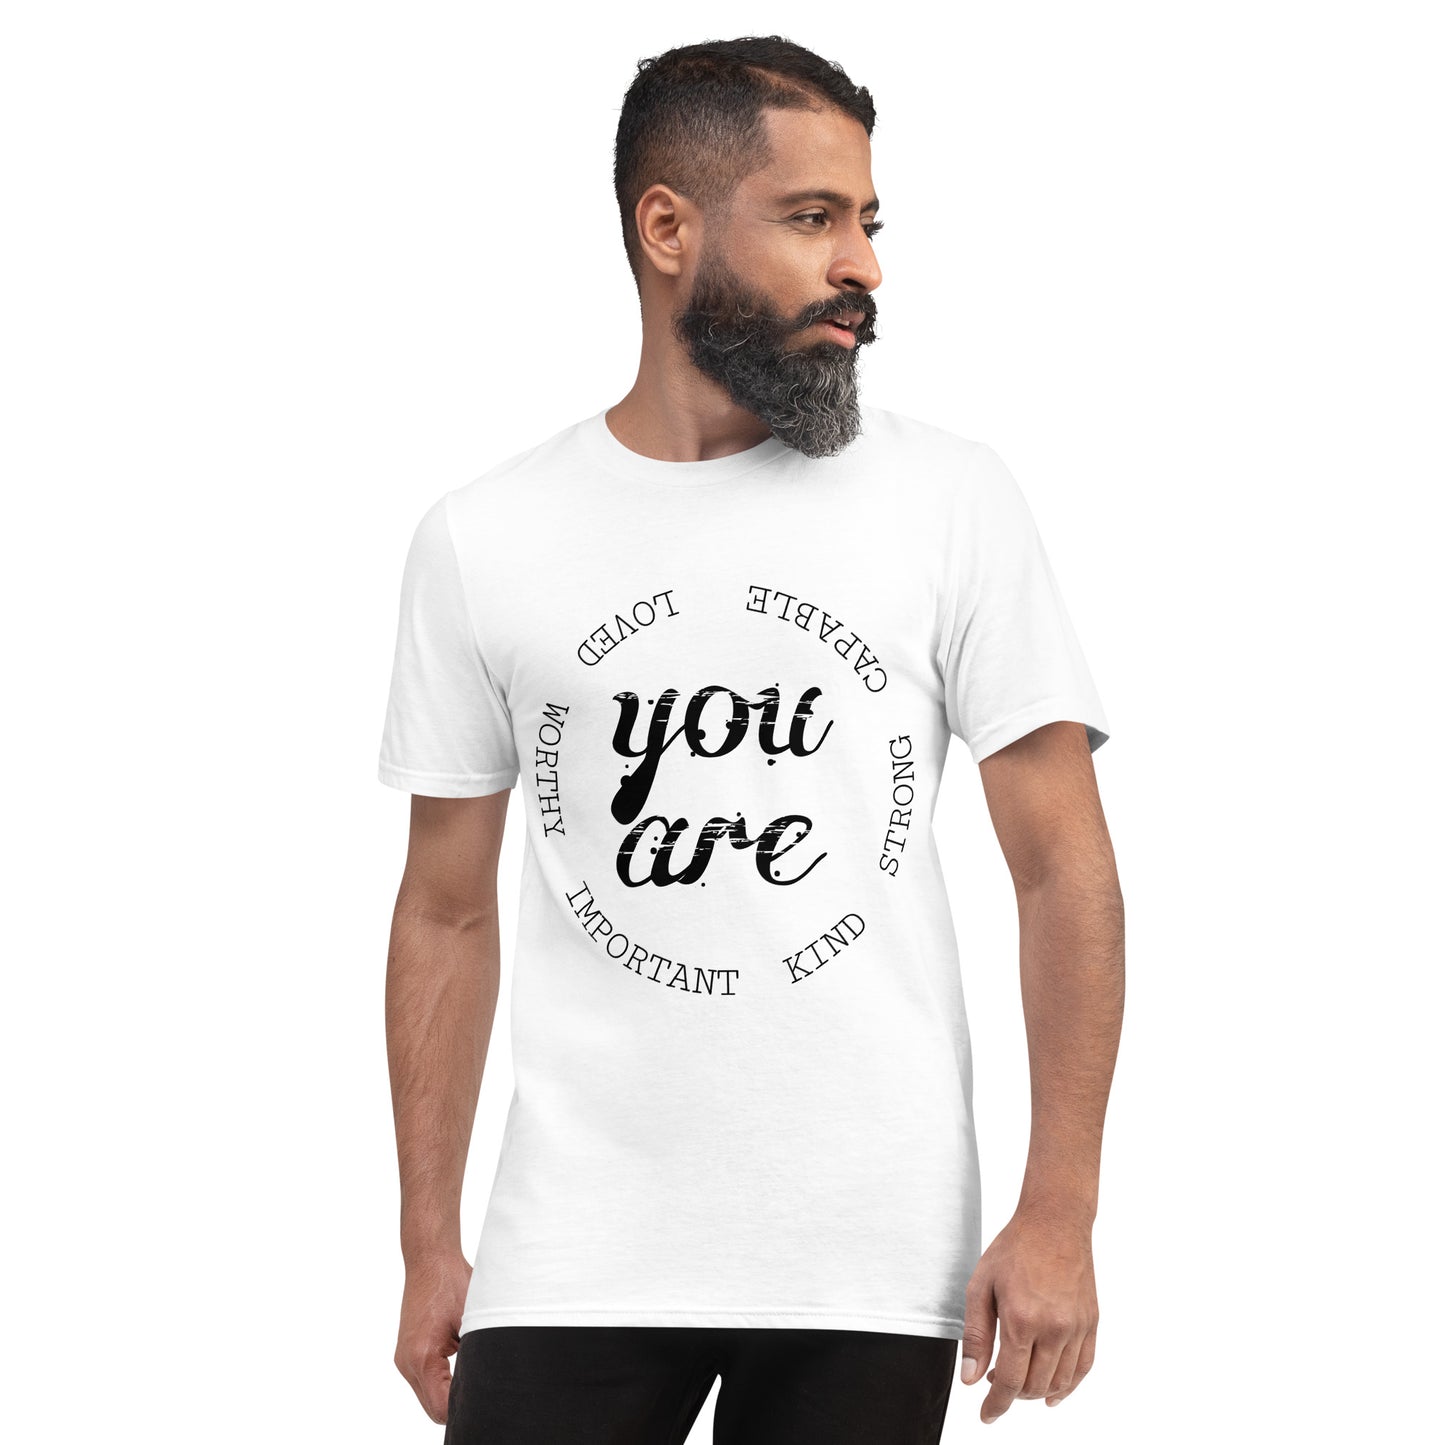 You Are... Short-Sleeve T-Shirt